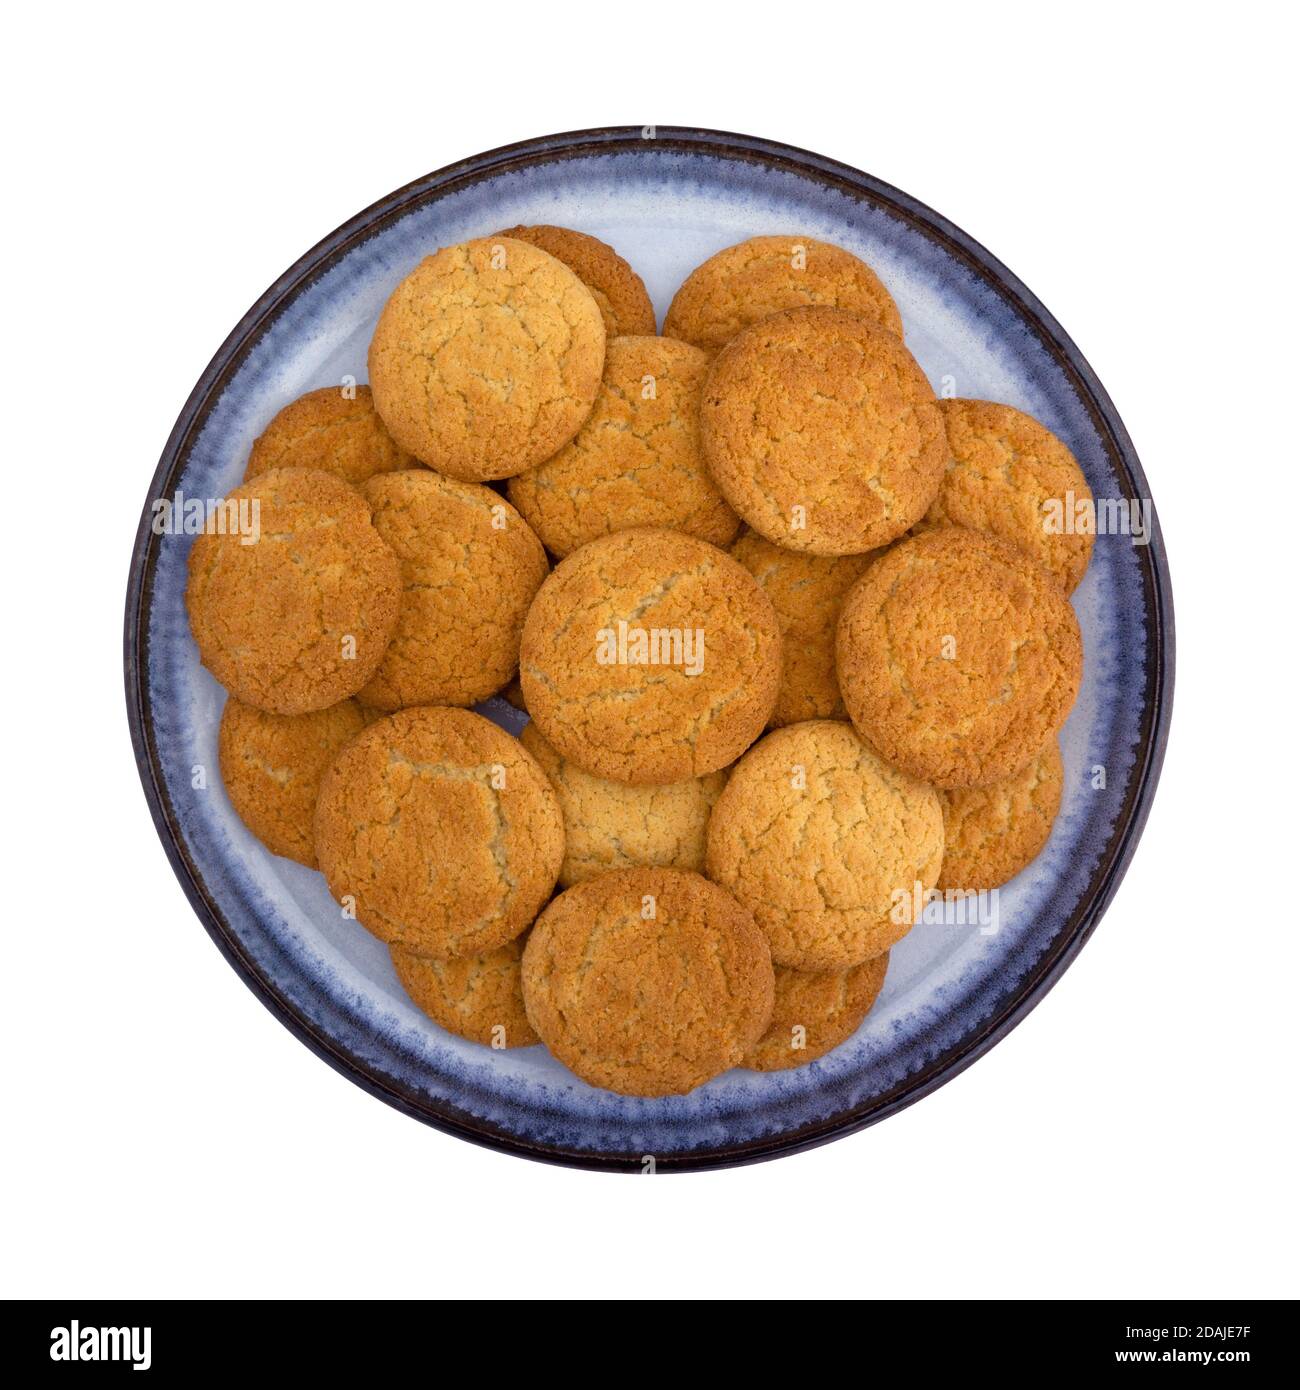 Top view of a group of coconut flavor cookies on a blue stoneware plate isolated on a white background. Stock Photo